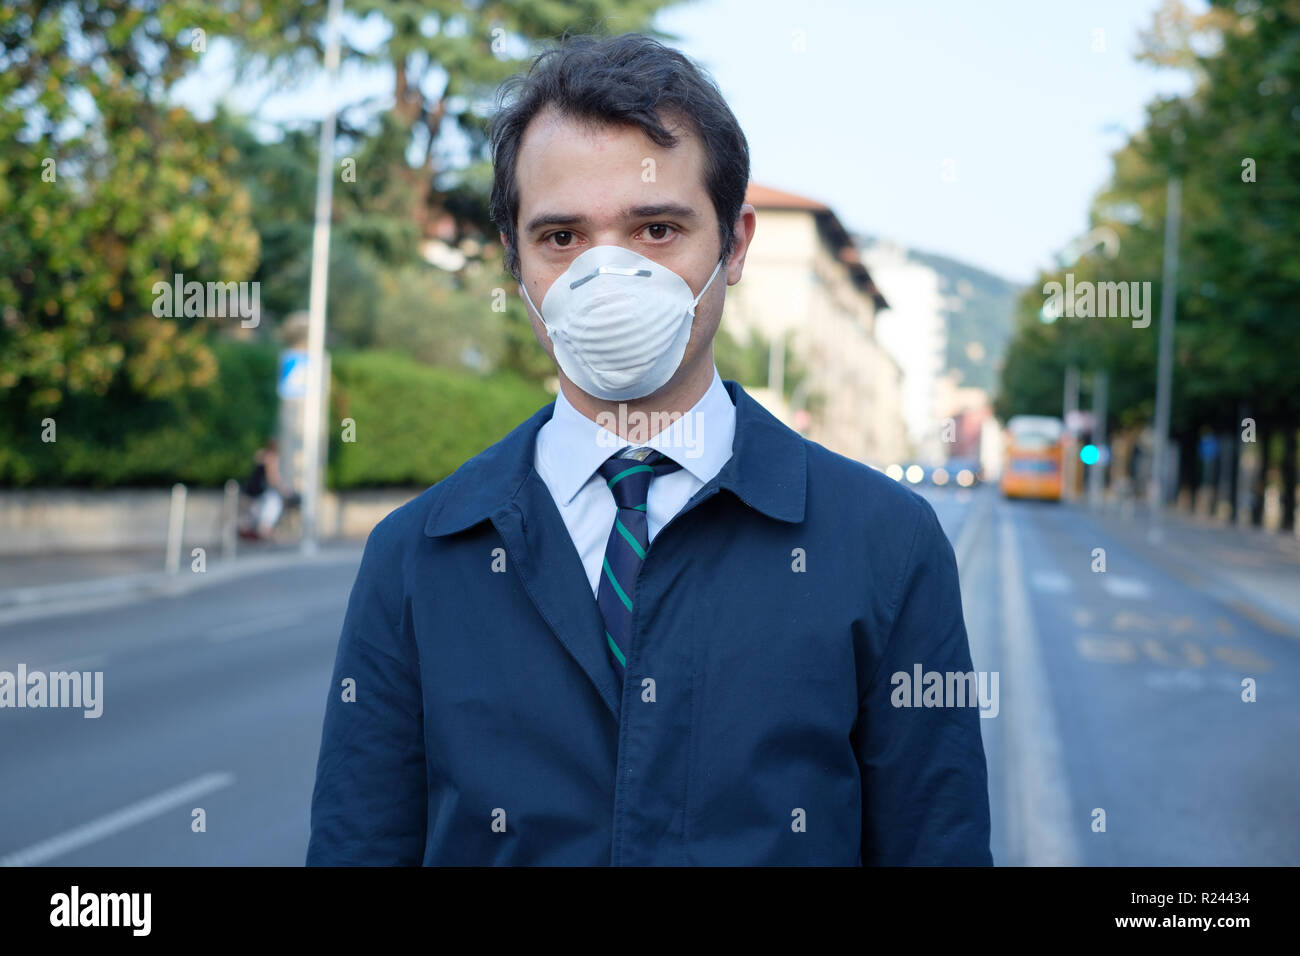 Man walking in the city wearing protection mask against smog air pollution Stock Photo